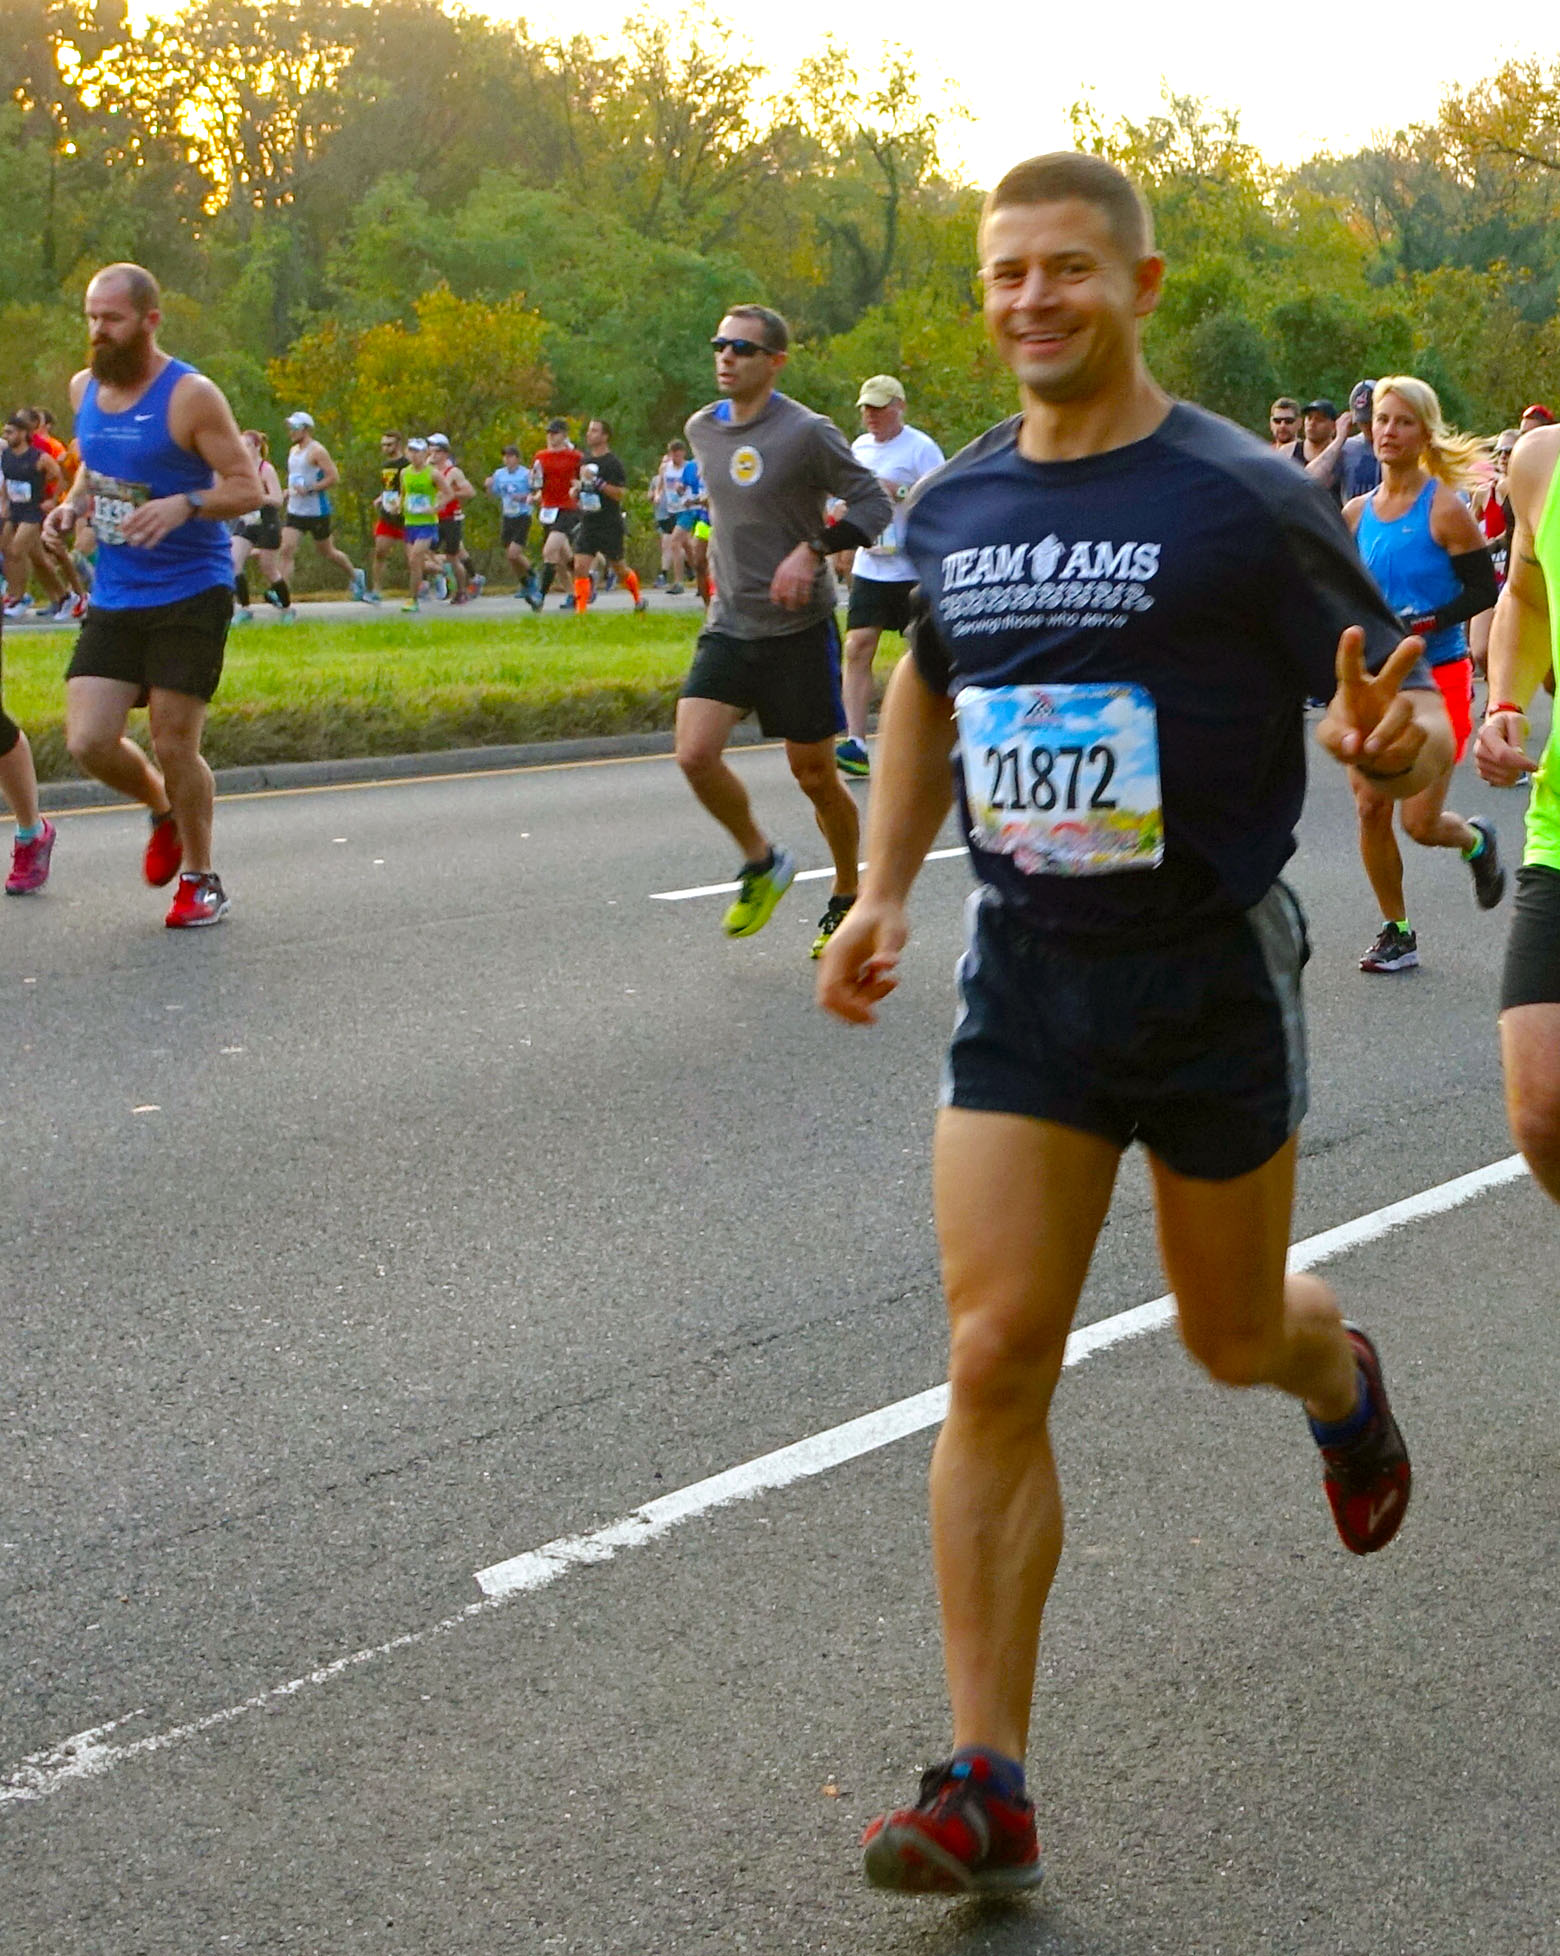 Father Luke Willenberg, CH (CPT), USA, led Team AMS across the finish line in the 41st annual Marine Corps Marathon on Oct. 30, 2016, in the nation’s capital.